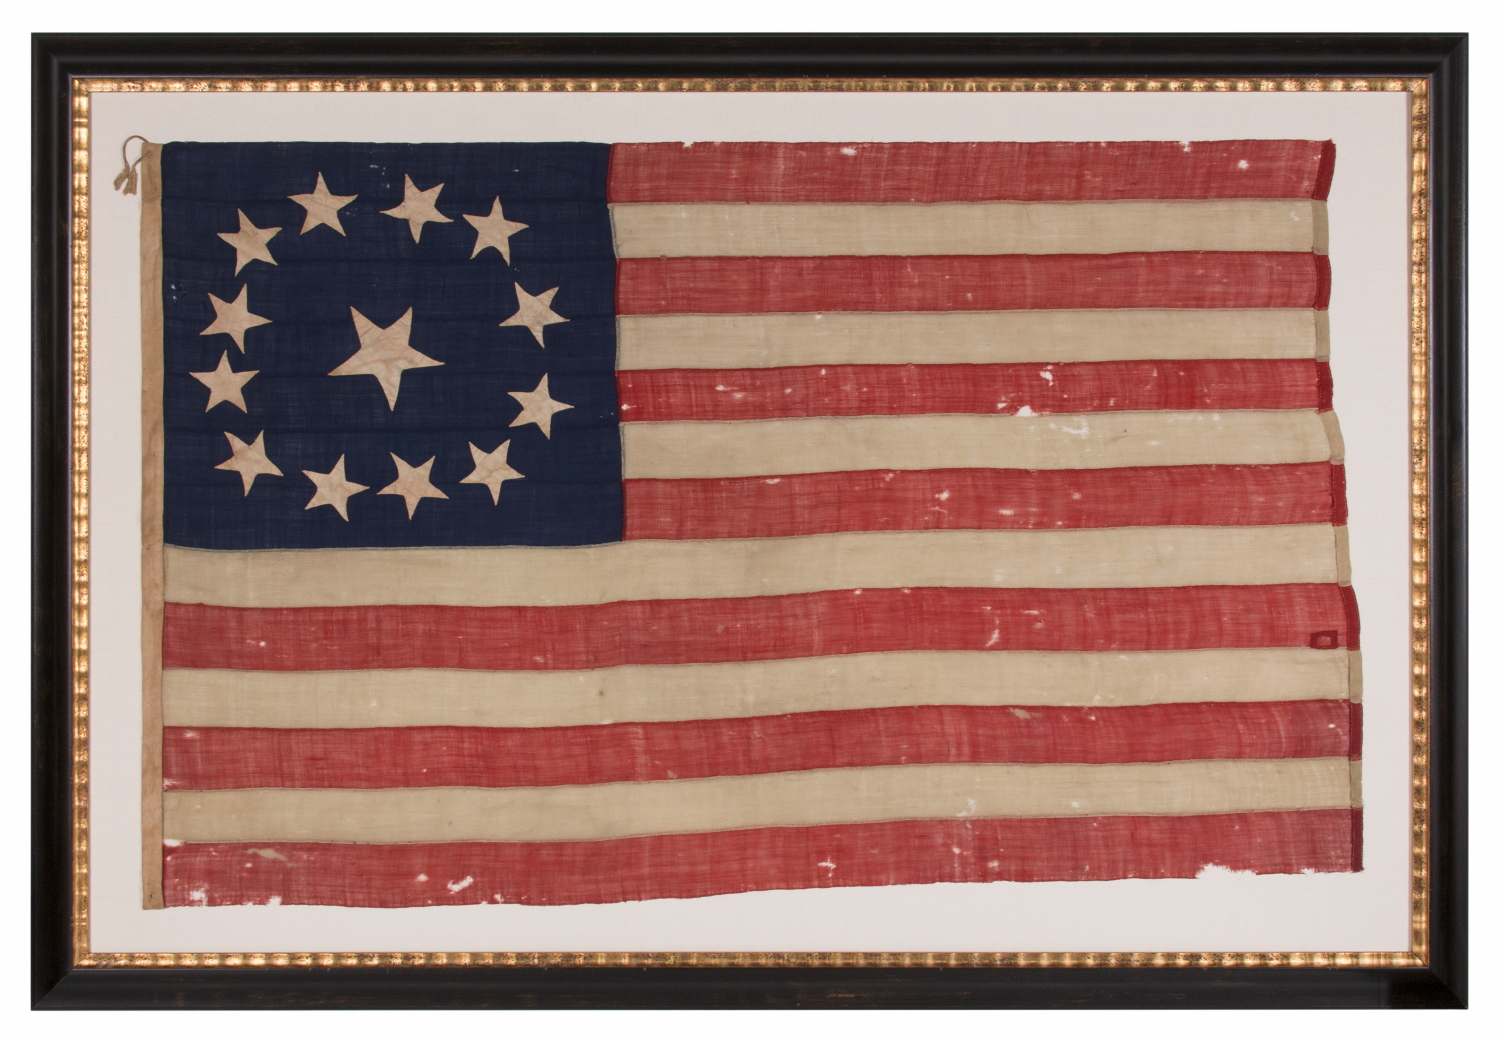 13 STAR ANTIQUE AMERICAN FLAG WITH A CIRCULAR VERSION OF WHAT IS KNOWN AS THE 3RD MARYLAND PATTERN, ENTIRELY HAND-SEWN, WITH ESPECIALLY LARGE STARS SURROUNDING AN EVEN LARGER CENTER STAR; MADE SOMETIME BETWEEN 1850 AND THE CIVIL WAR (1861-65), AN EXCEPTIONAL EXAMPLE WITH WONDERFUL FOLK QUALITIES